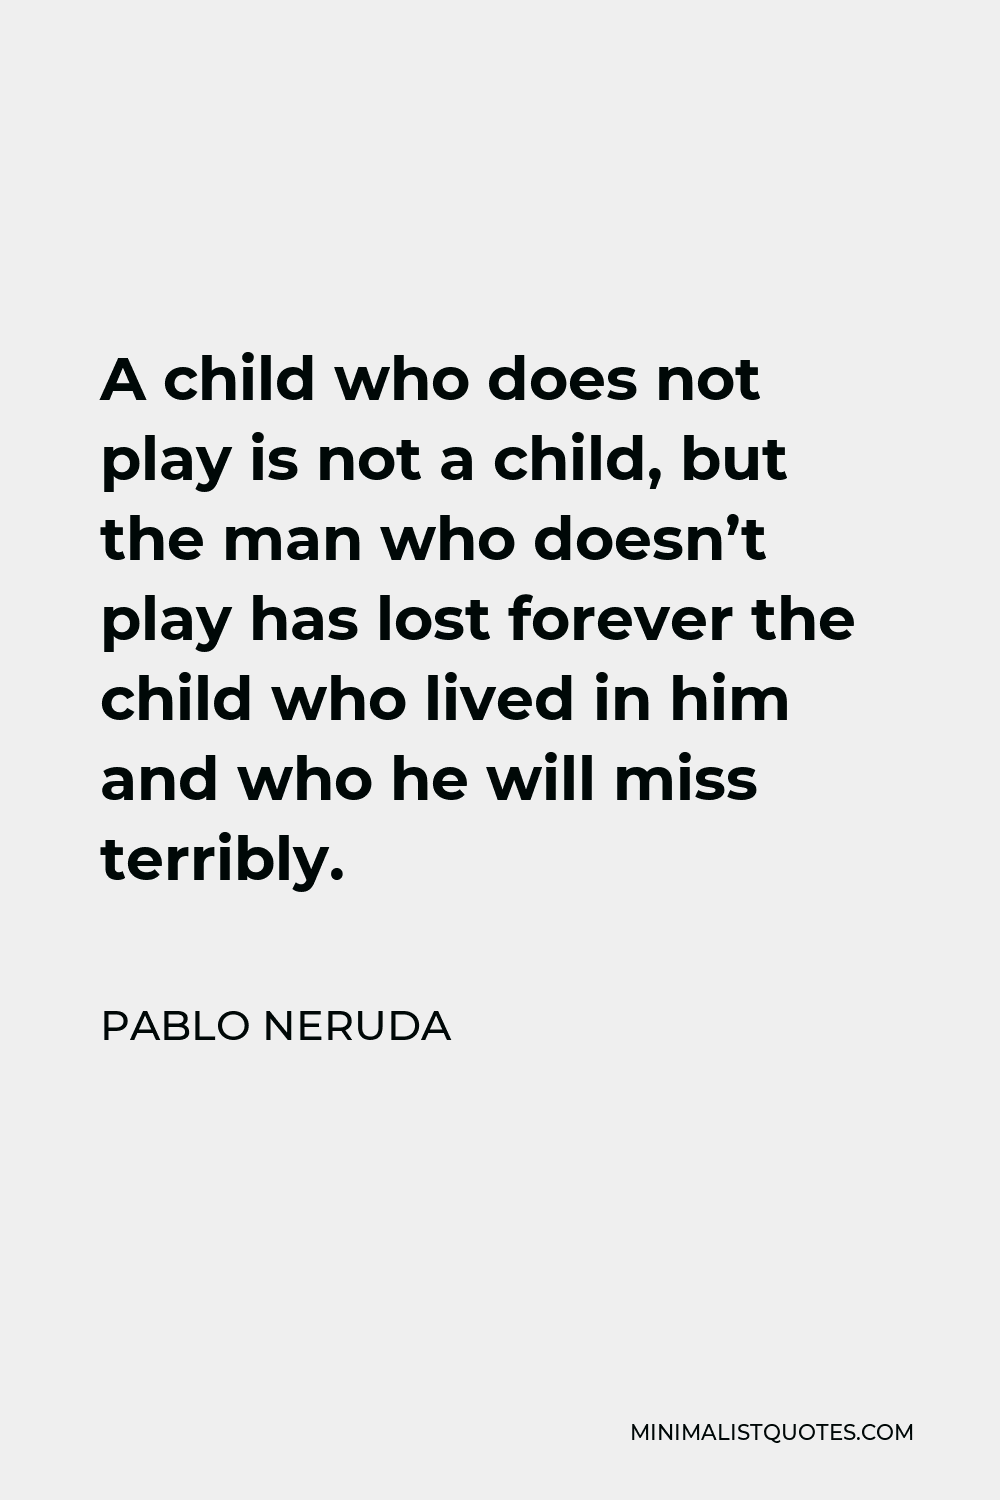 Pablo Neruda Quote - A child who does not play is not a child, but the man who doesn’t play has lost forever the child who lived in him and who he will miss terribly.